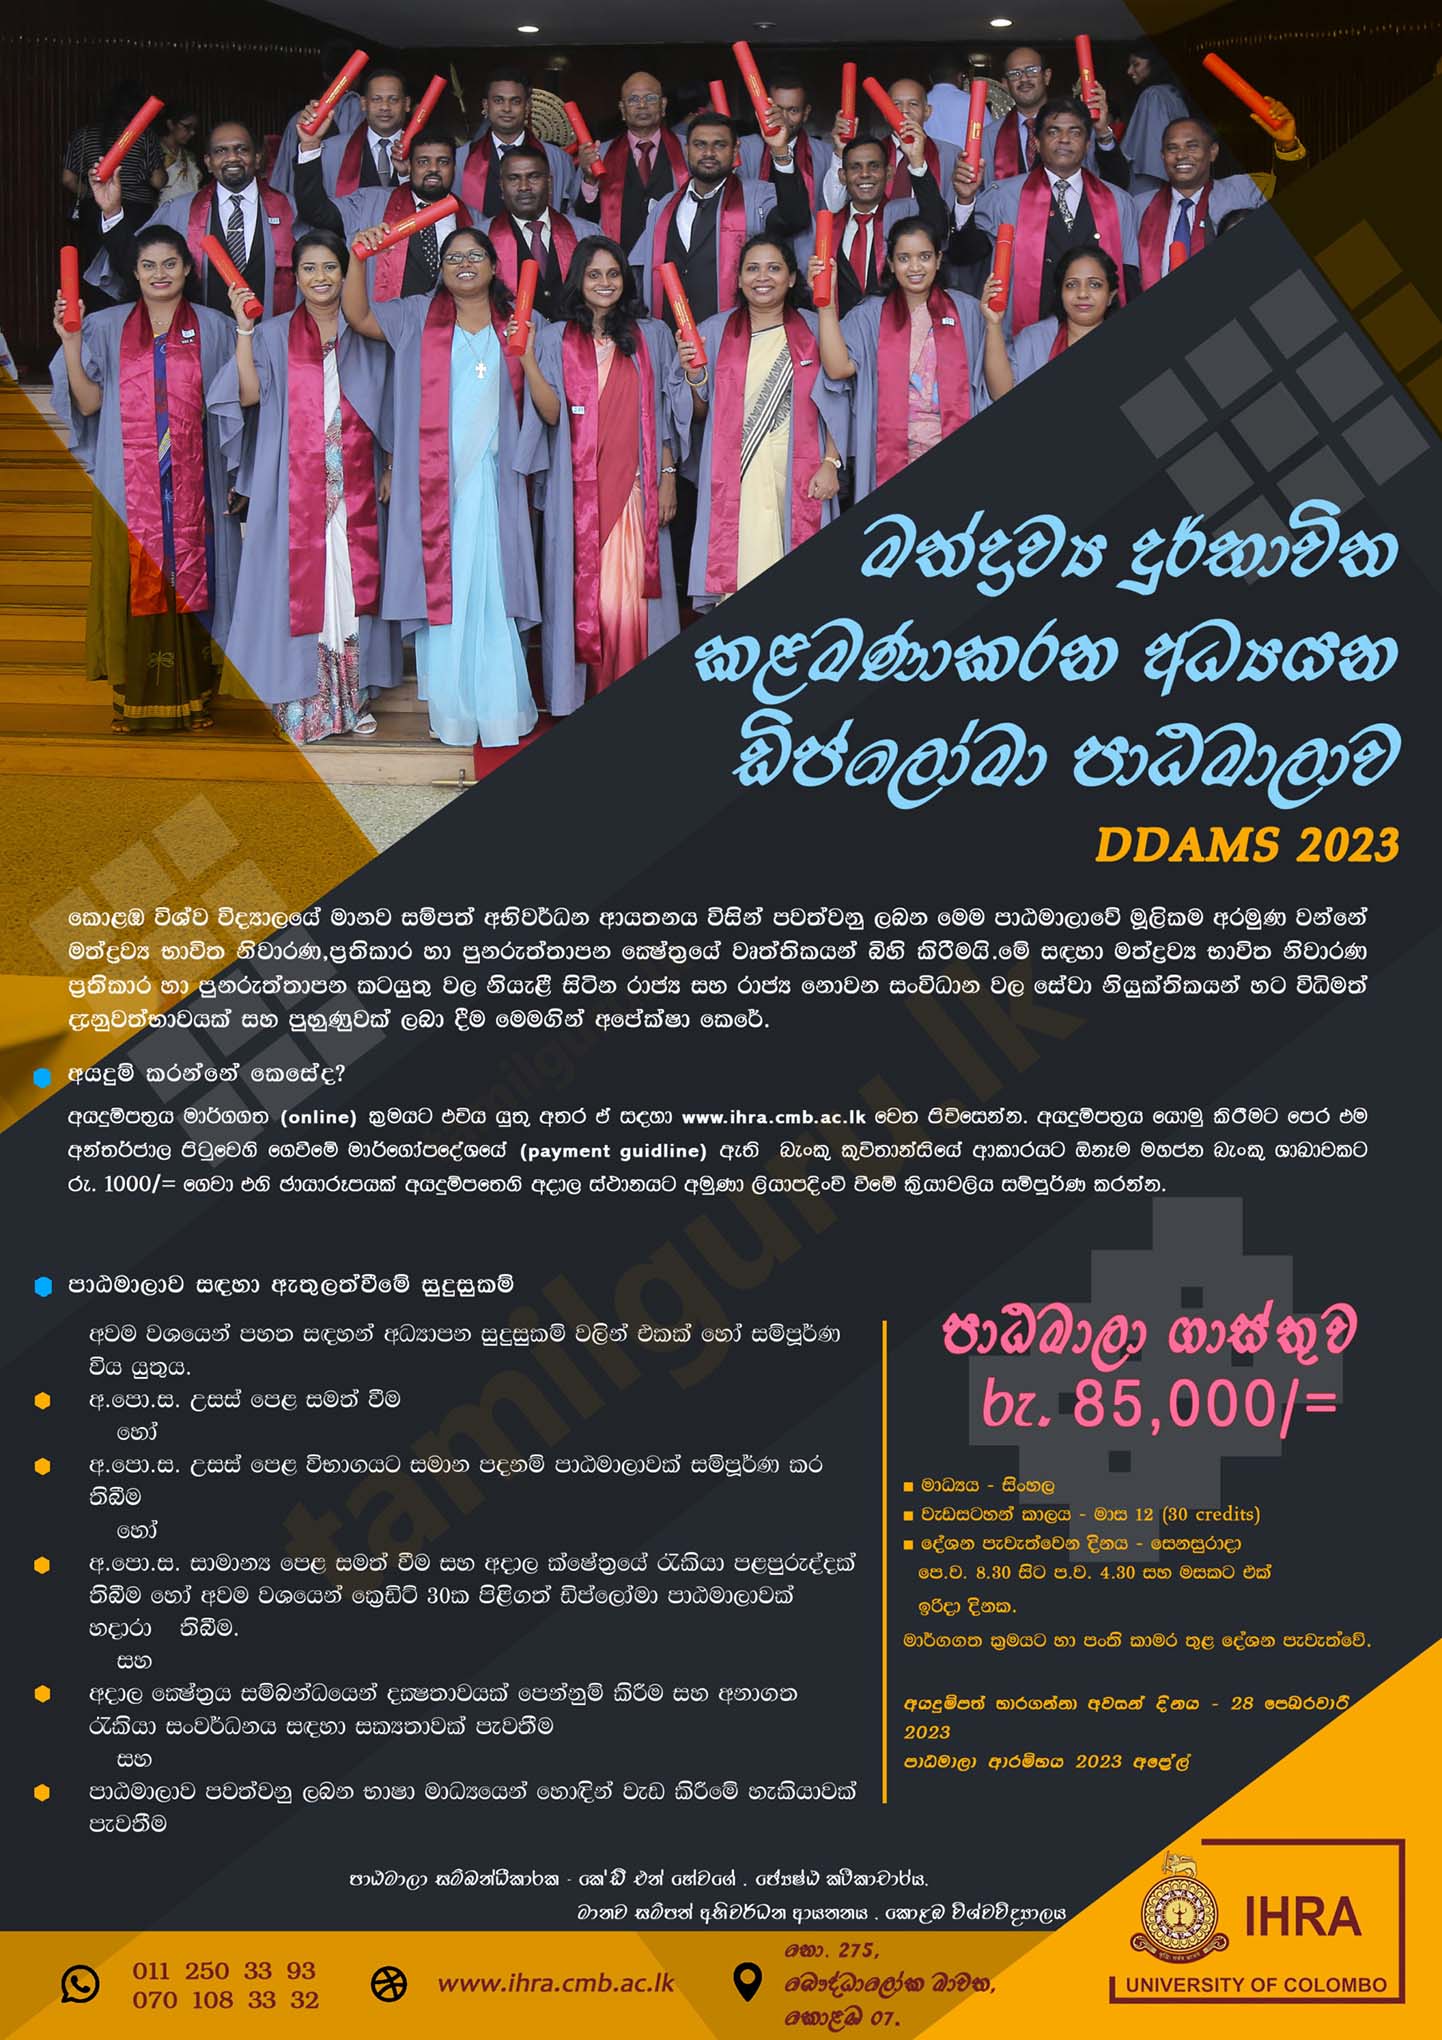 Application Calling Notice - Diploma in Drugs Abuse Management Studies (DDAMS) 2023 - University of Colombo (IHRA)